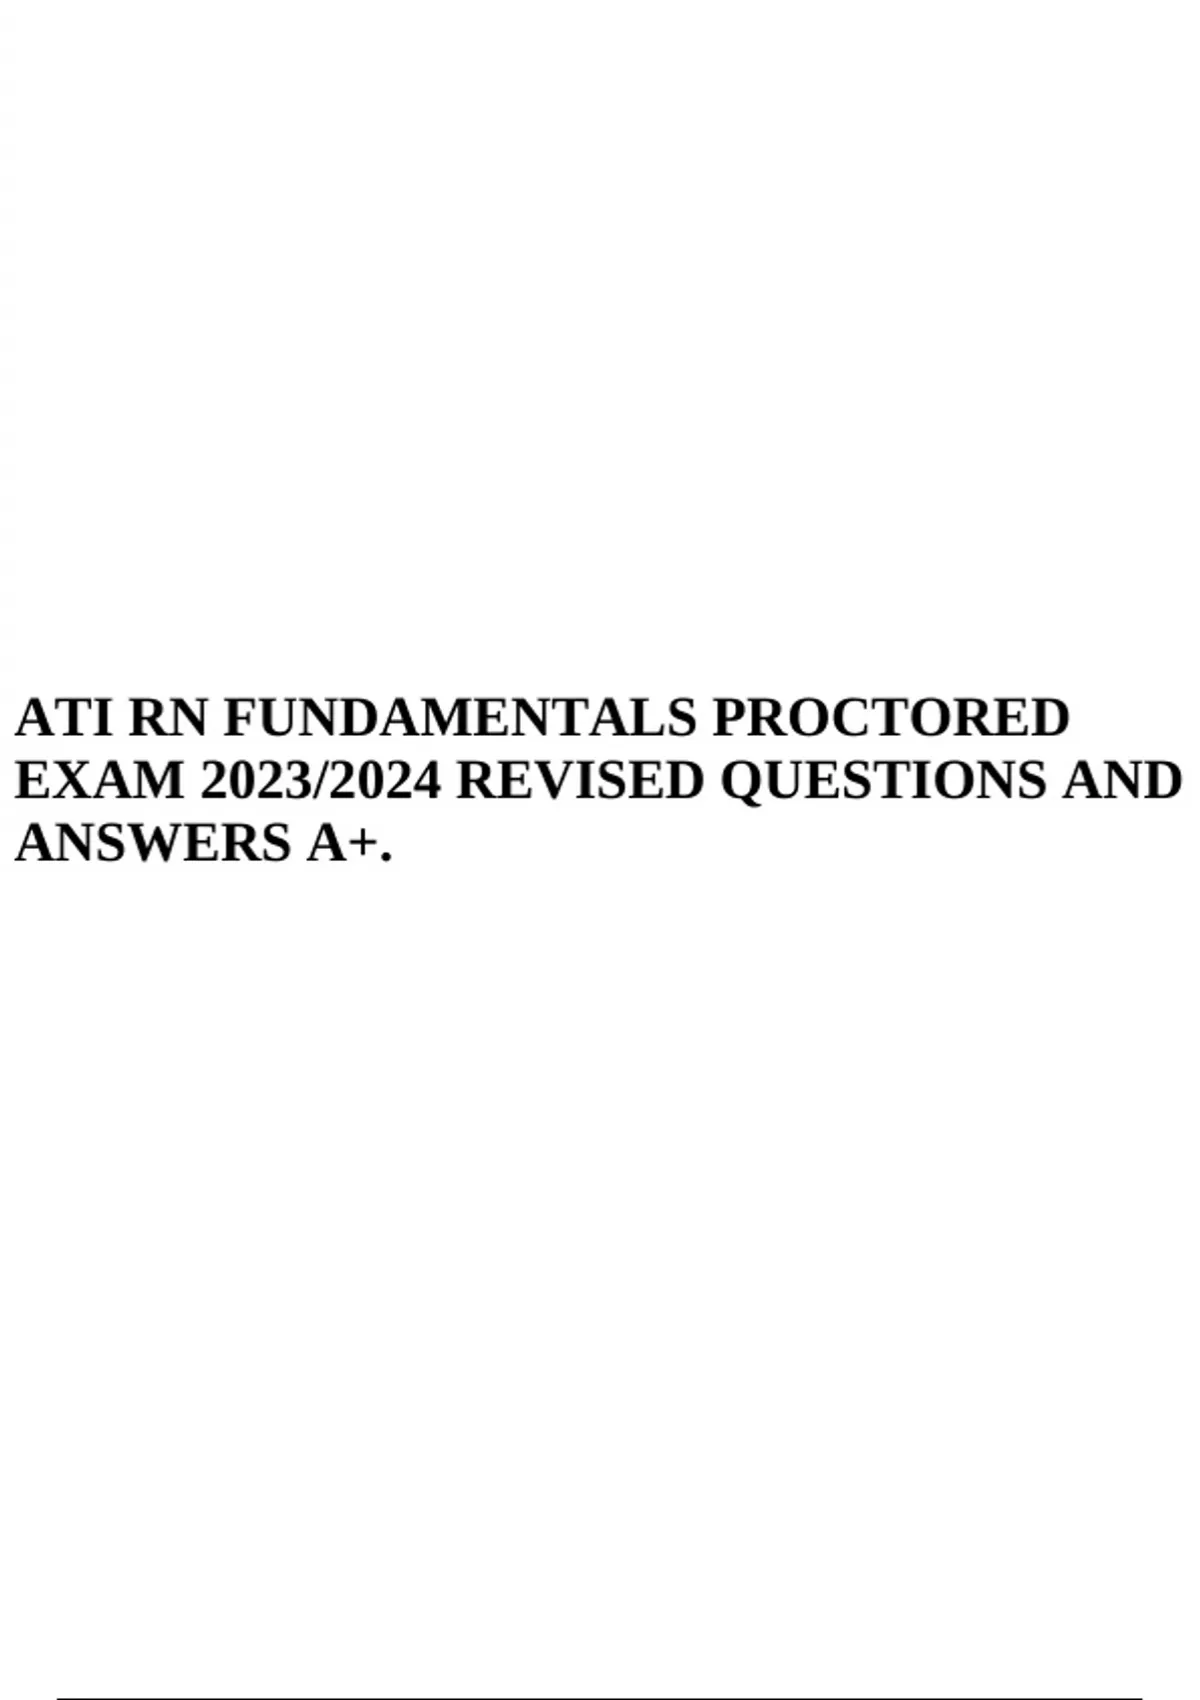 ATI RN FUNDAMENTALS PROCTORED EXAM 2023/2024 REVISED QUESTIONS AND